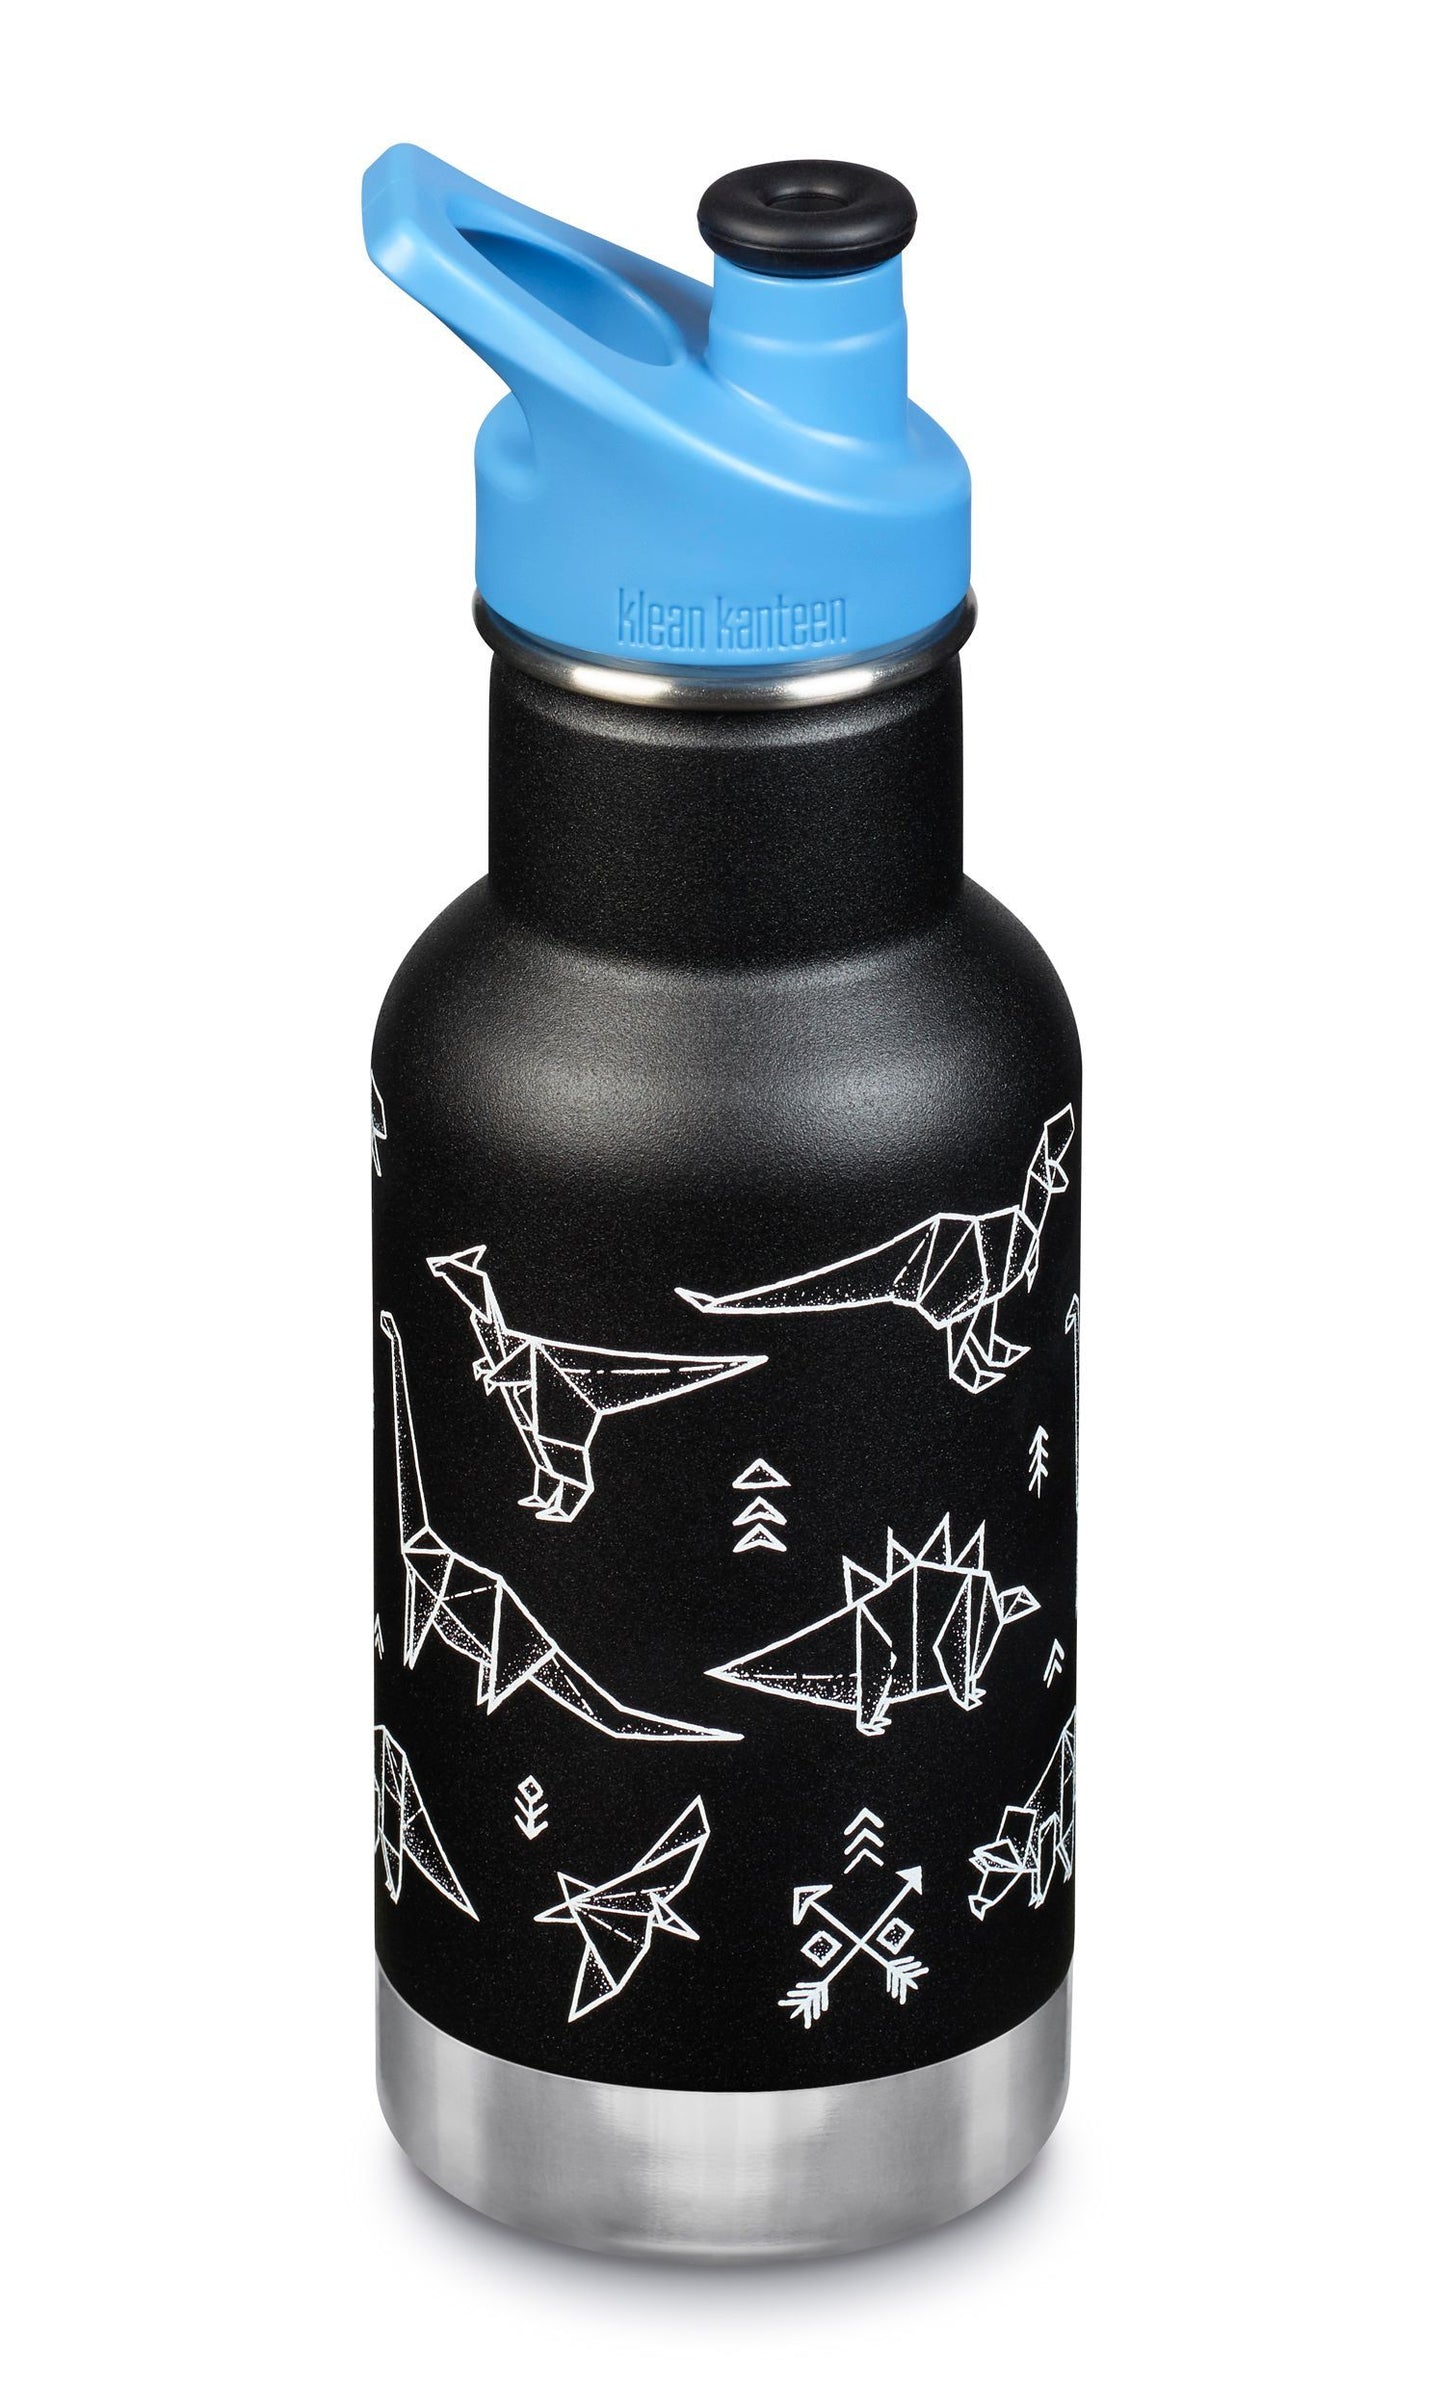 Matte medium bright blue insulated bottle with a stainless steel base and a blue plastic lid. "Klean Kanteen Insulated" logo printed on bottle in white.